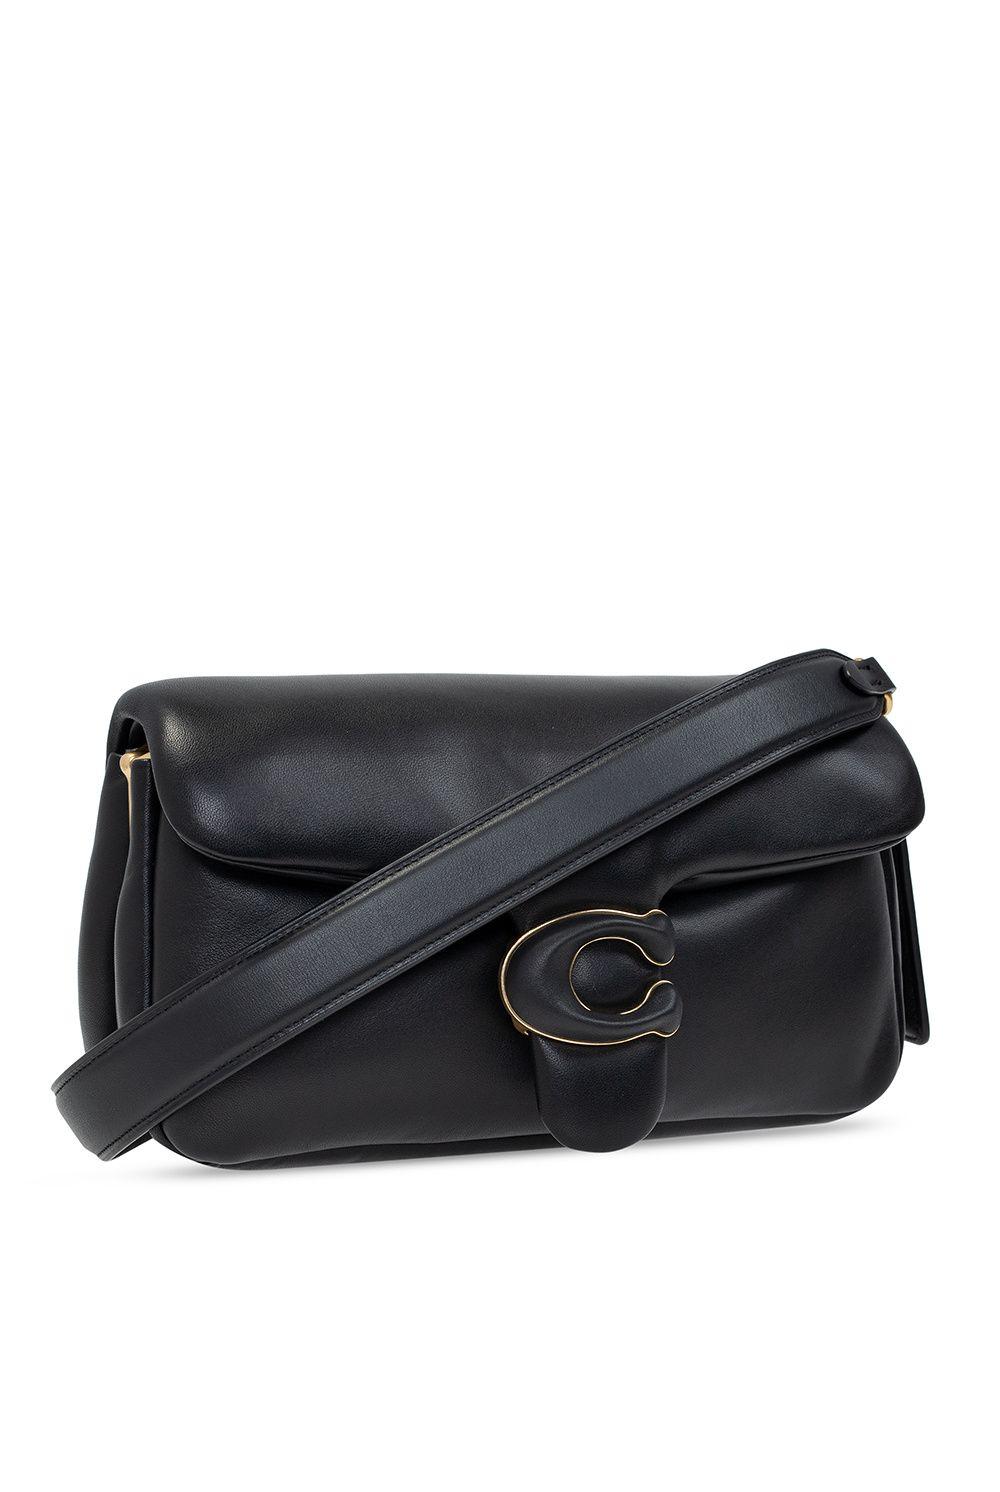 Buy Coach Pillow Tabby Shoulder Bag with Sling Strap, Black Color Women